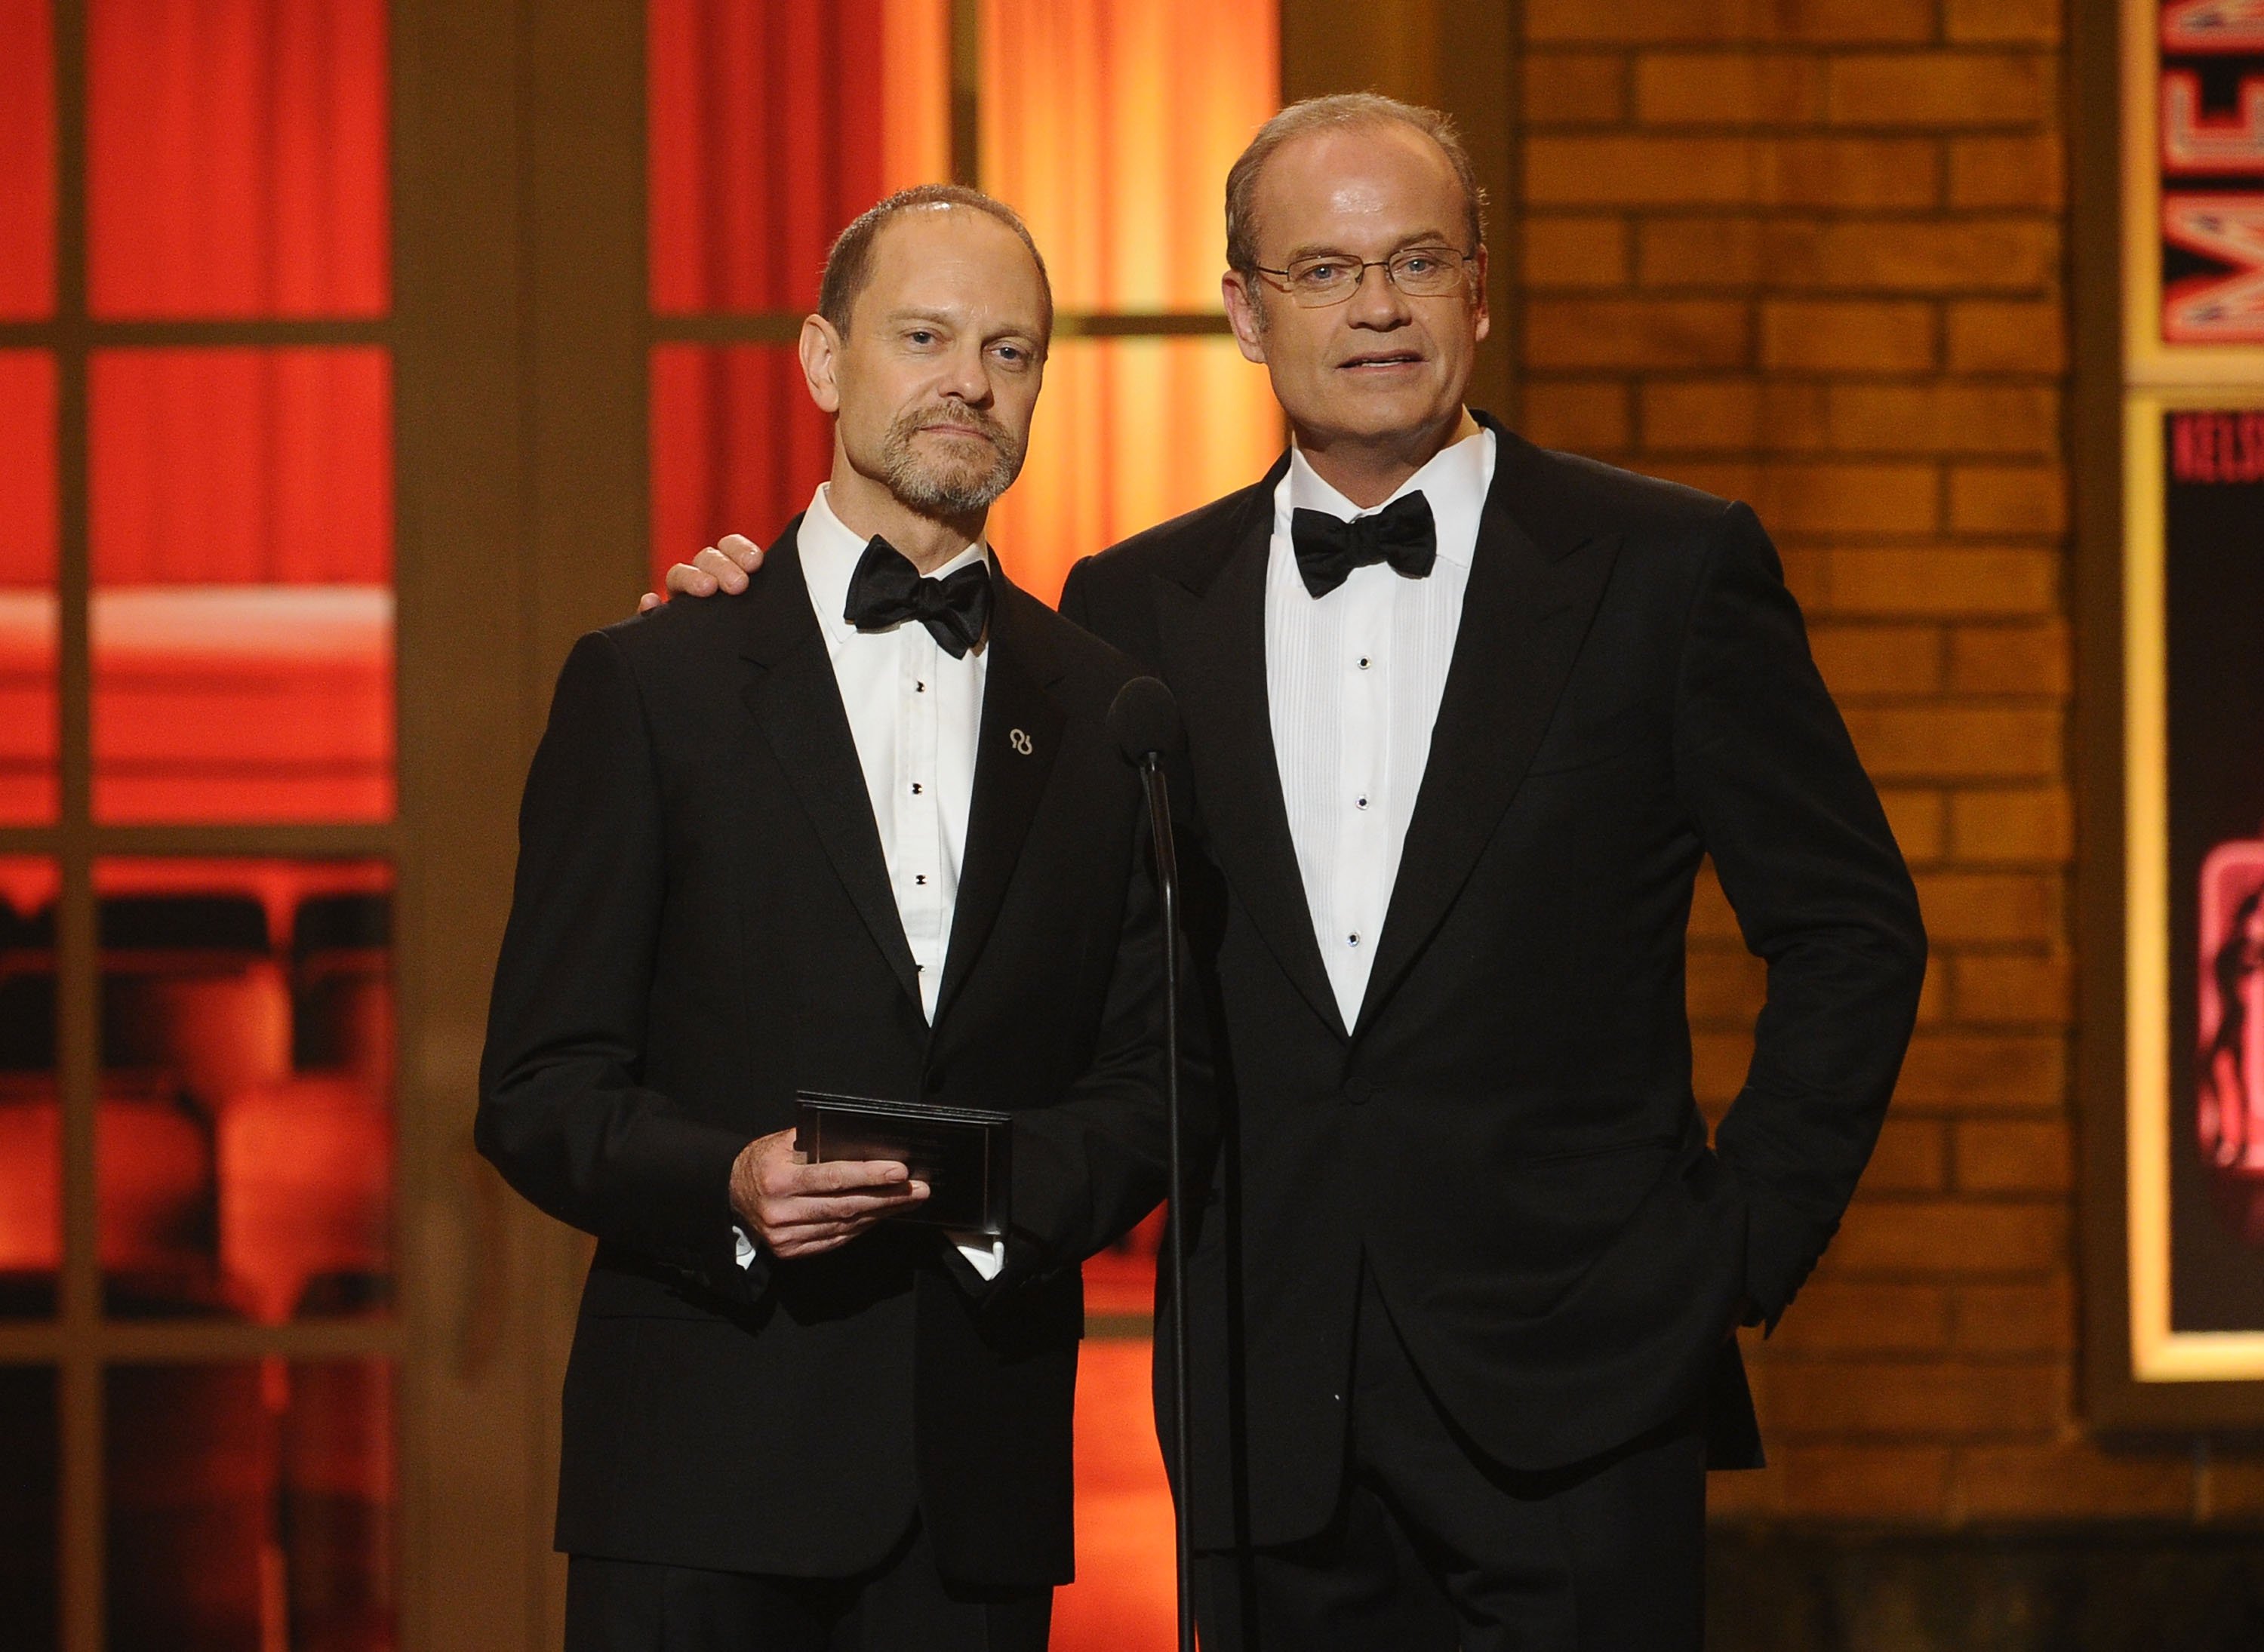 David Hyde Pierce and Kelsey Grammer present onstage during the 64th Annual Tony Awards at Radio City Music Hall on June 13, 2010